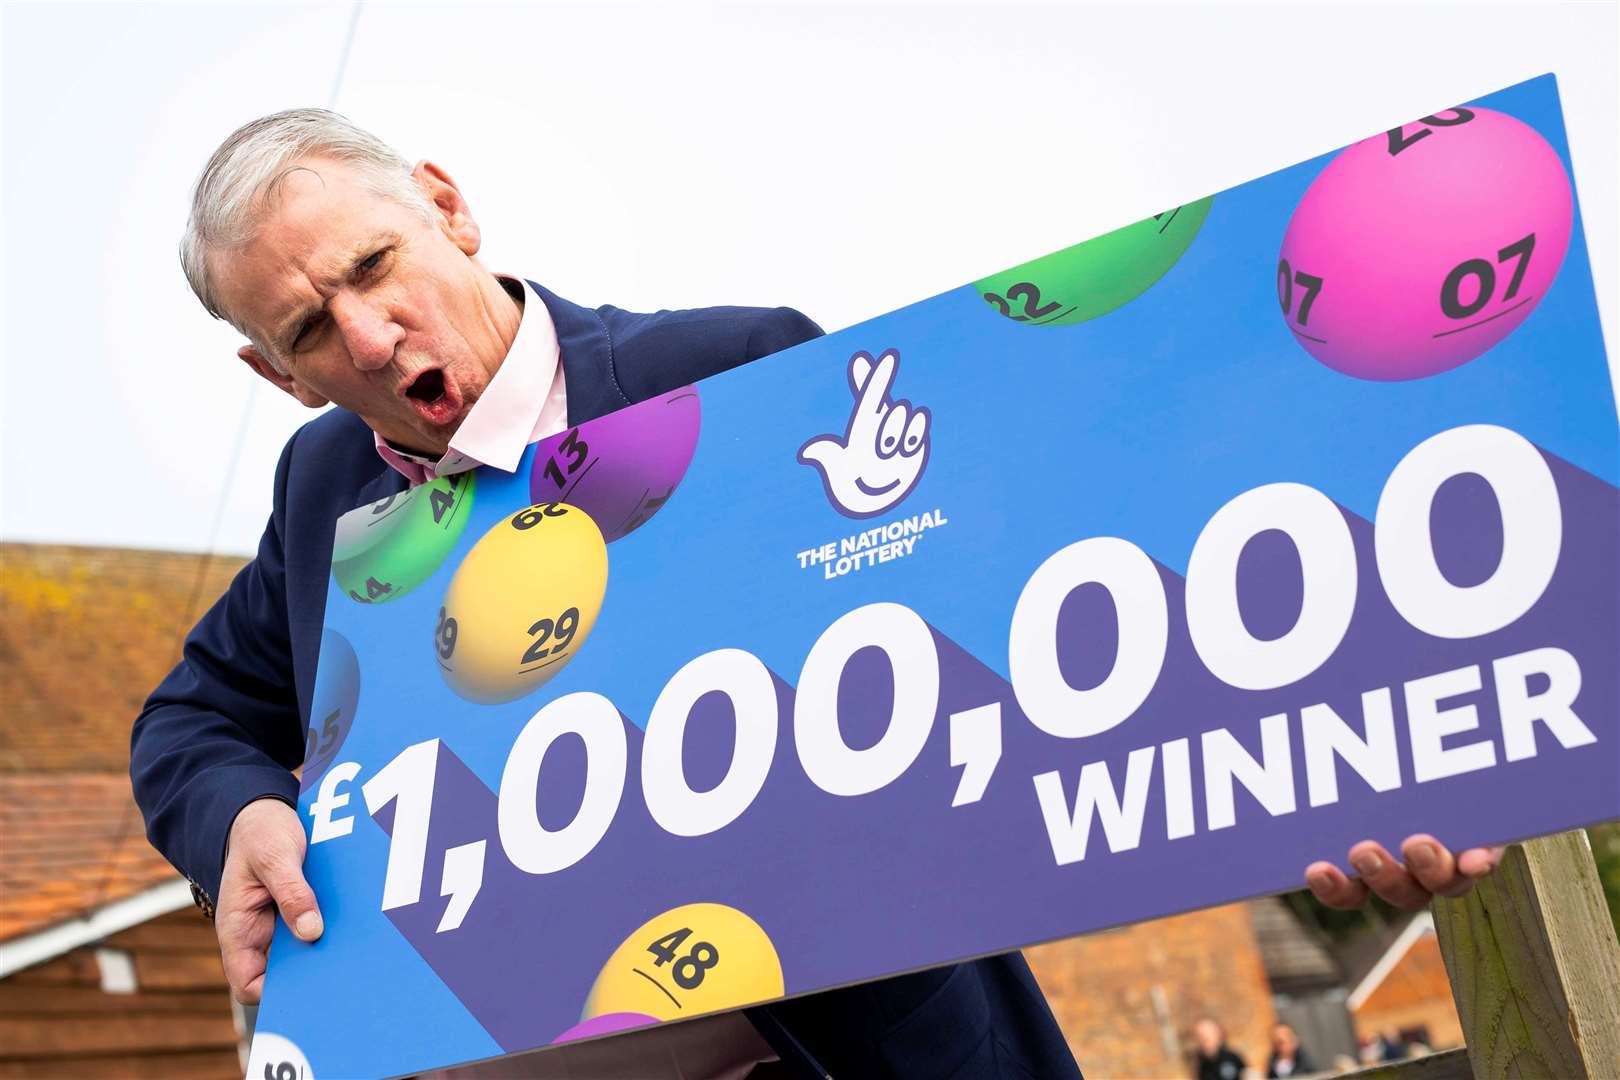 Camelot handed out £4.85 billion in prizes to lottery winners during the past year (Camelot/PA)